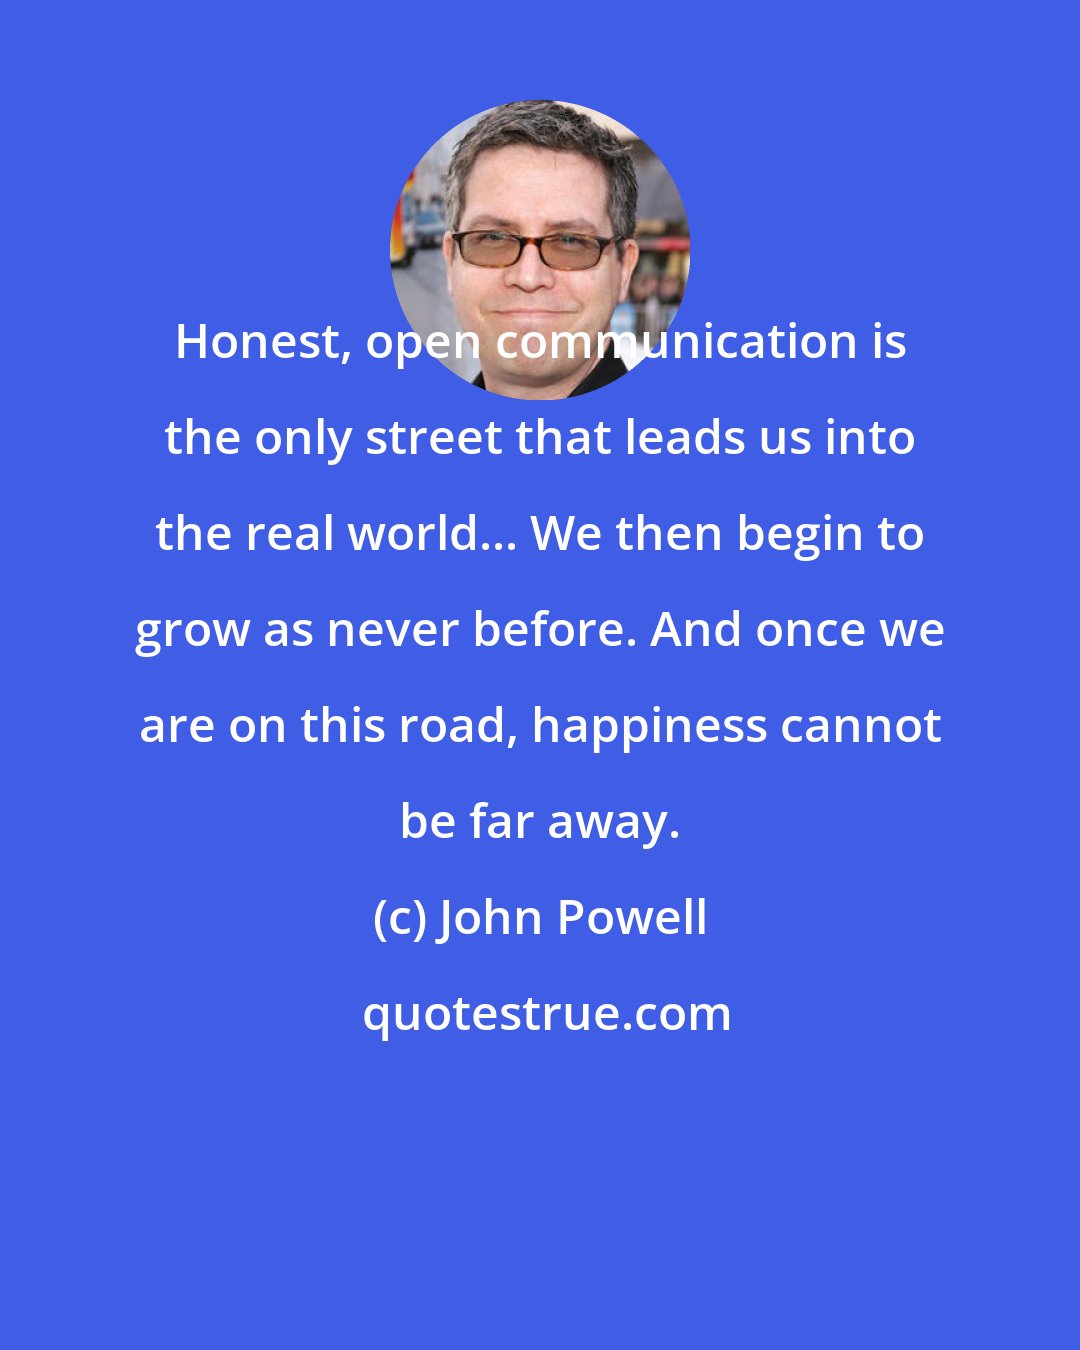 John Powell: Honest, open communication is the only street that leads us into the real world... We then begin to grow as never before. And once we are on this road, happiness cannot be far away.